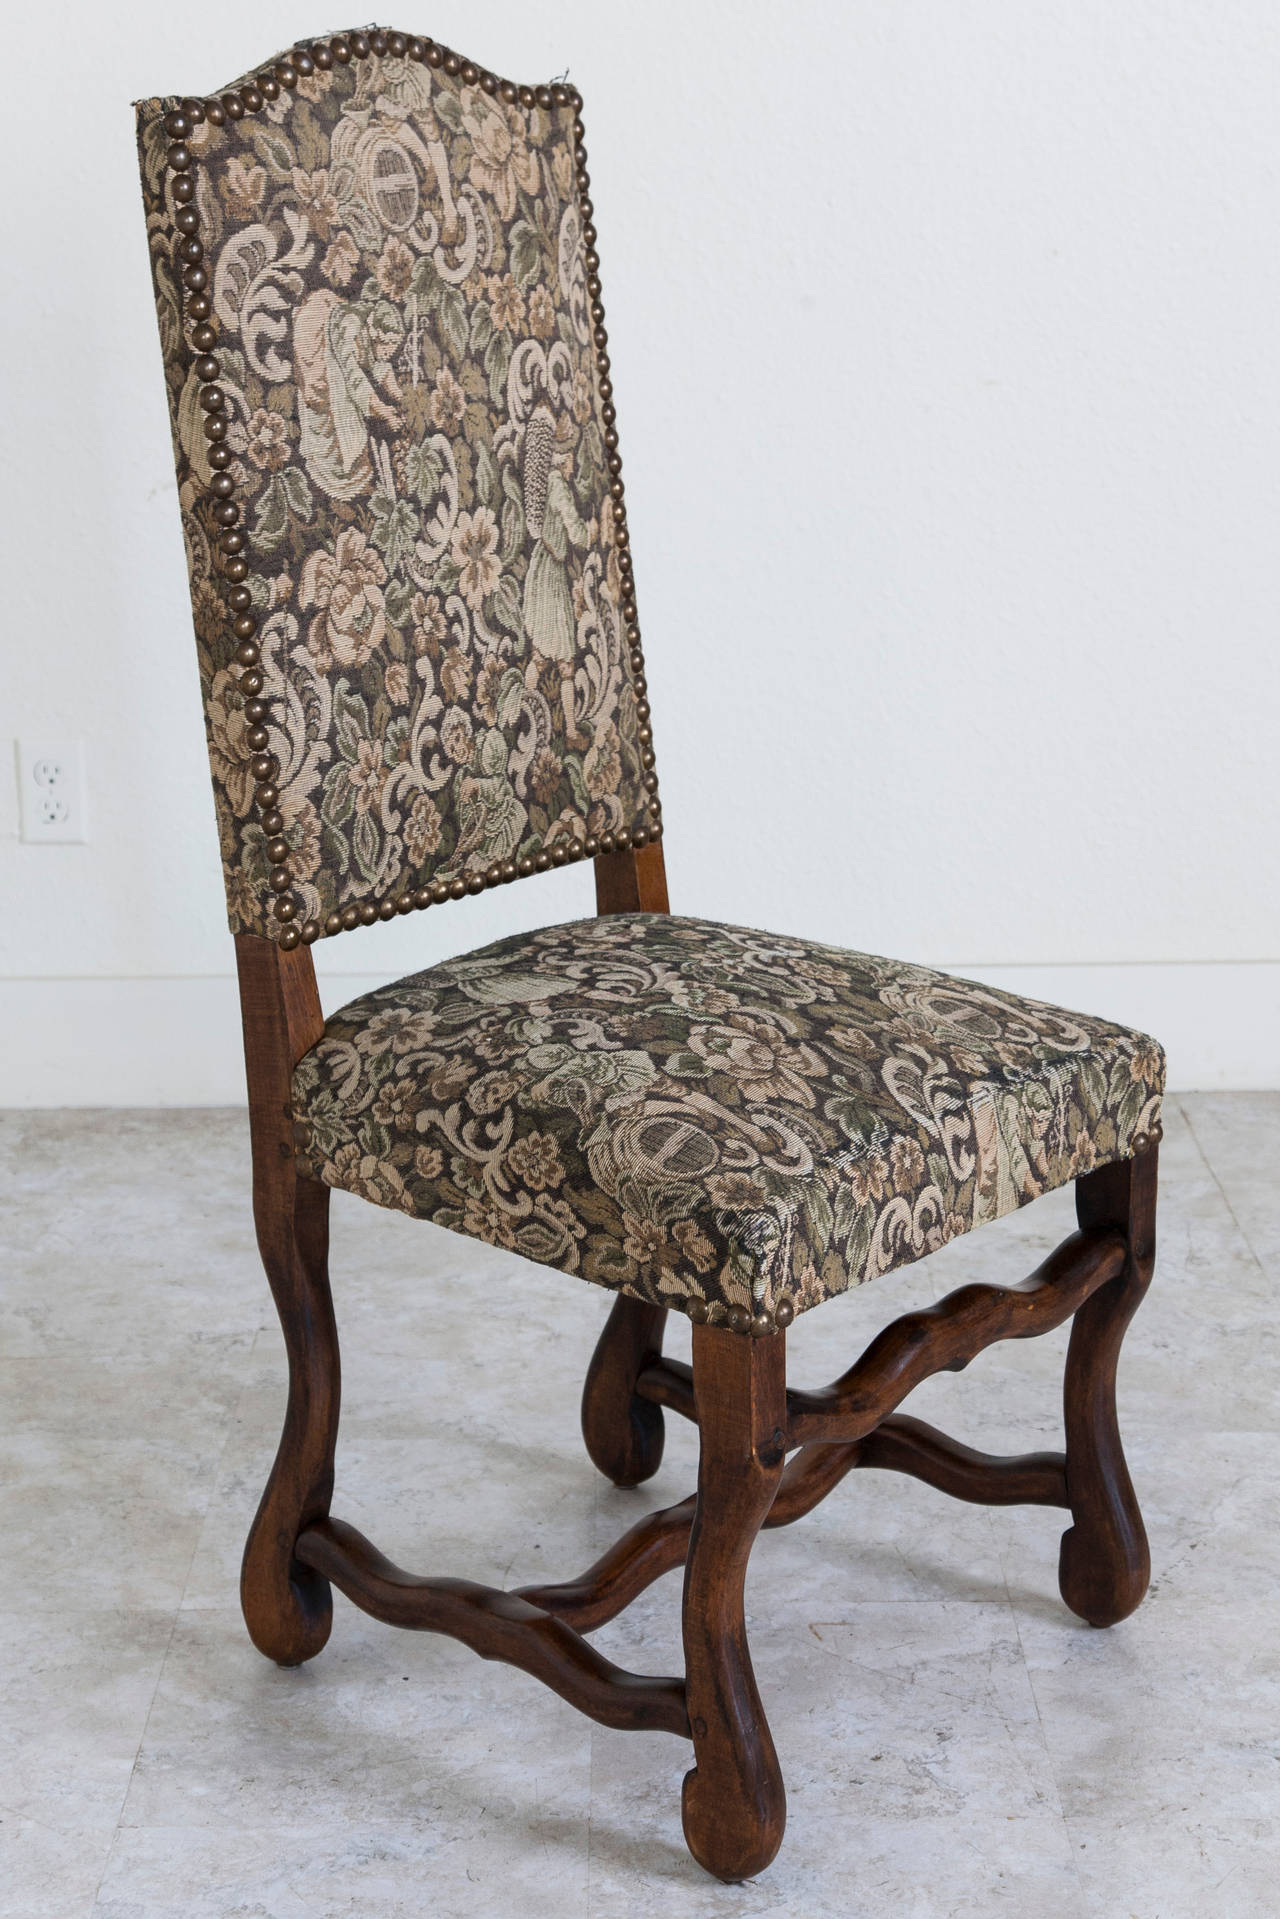 Set of six hand pegged ash mutton leg side chairs with tapestry upholstery and nailhead trim. Tapestry depicts medieval grape pickers in the vineyards.